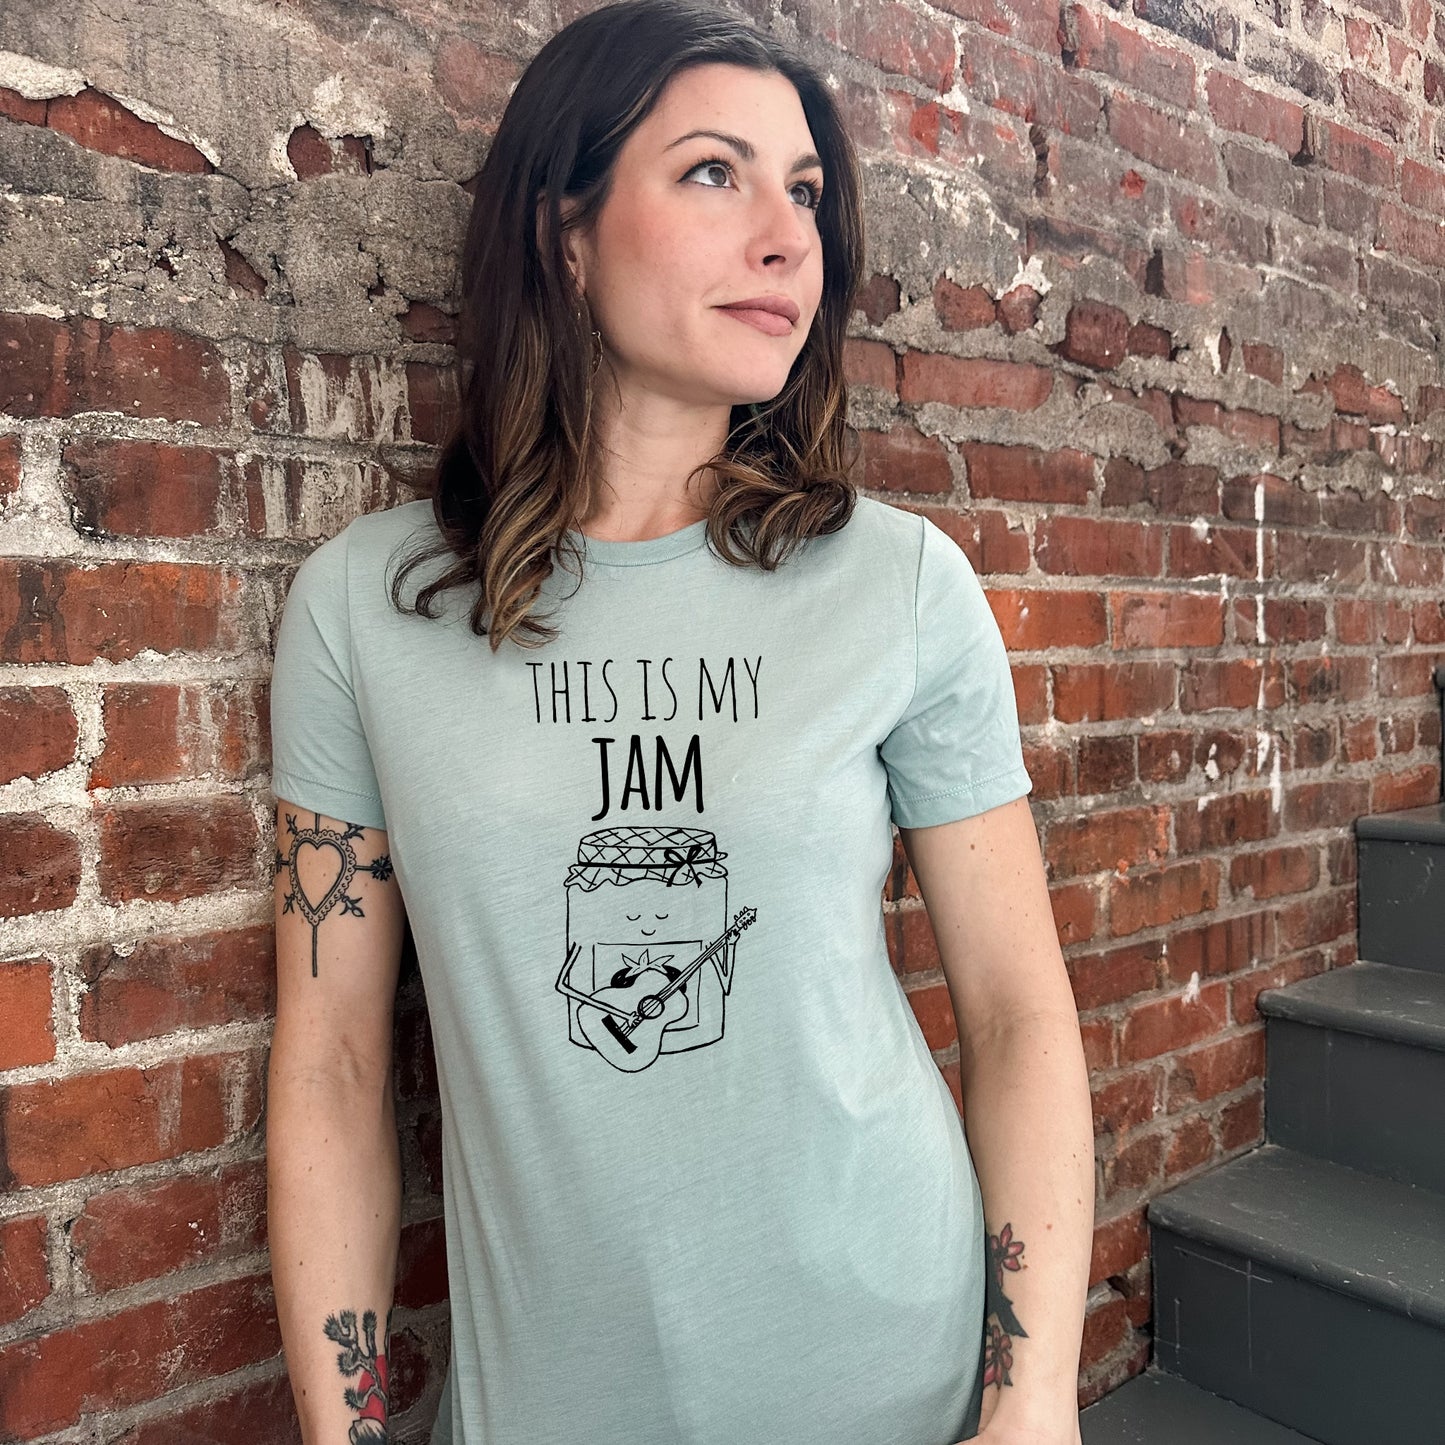 This Is My Jam - Women's Crew Tee - Olive or Dusty Blue